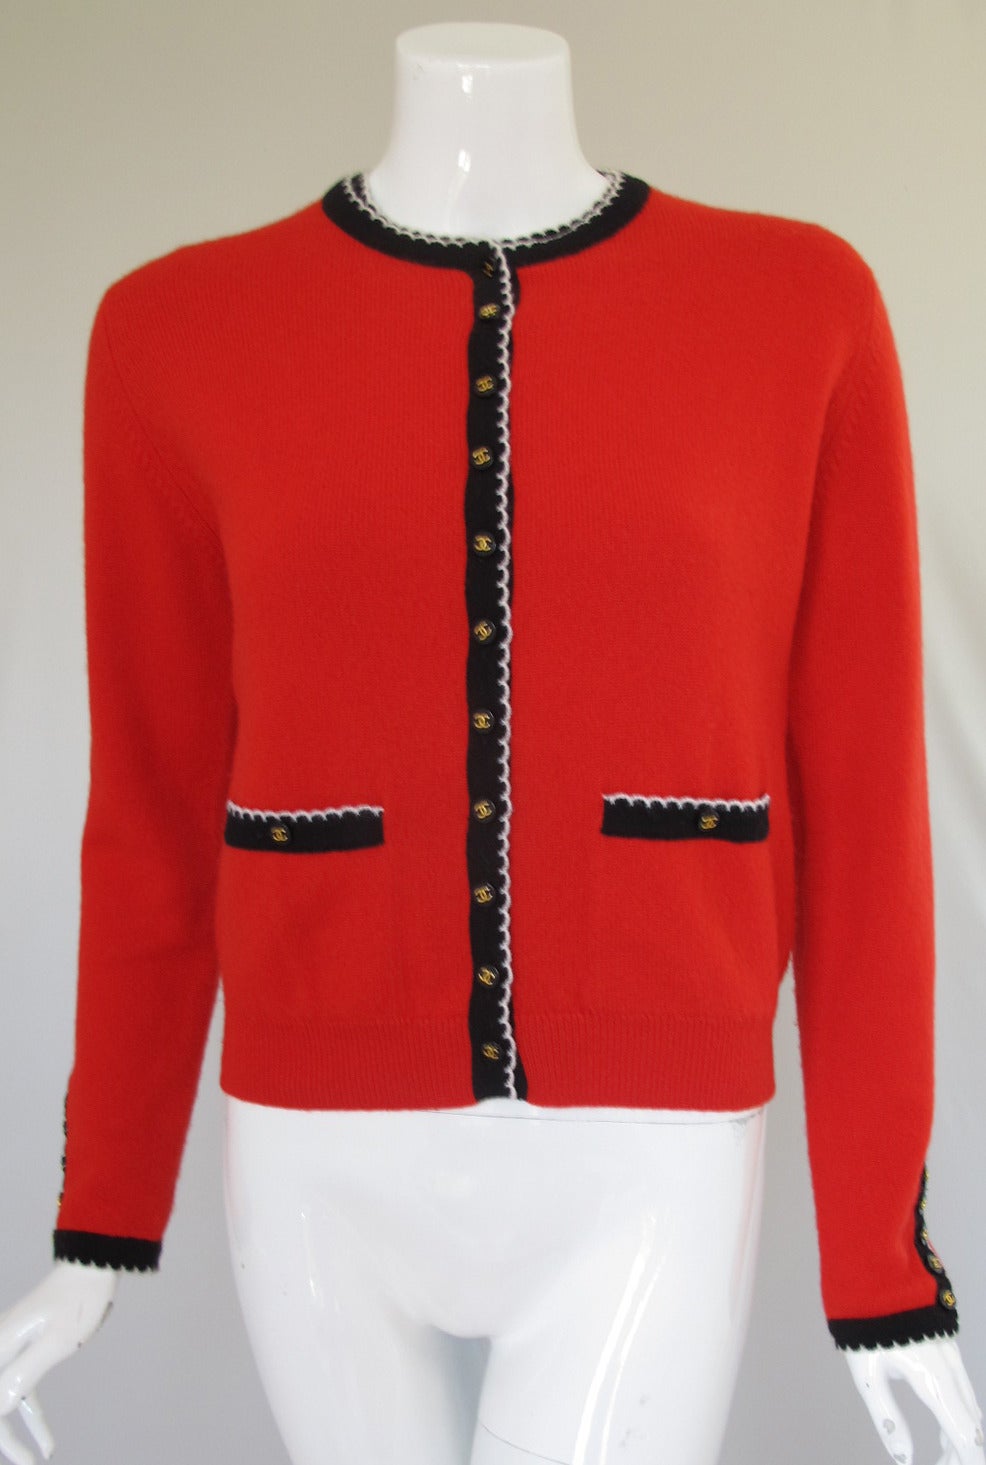 Chanel 100% cashmere twinset in red with black and white trim and black with gold Chanel CC logo buttons. The sweater beneath the cardigan is short sleeved with a button at the back neck. The size tag has been removed but my guess is this will fit a